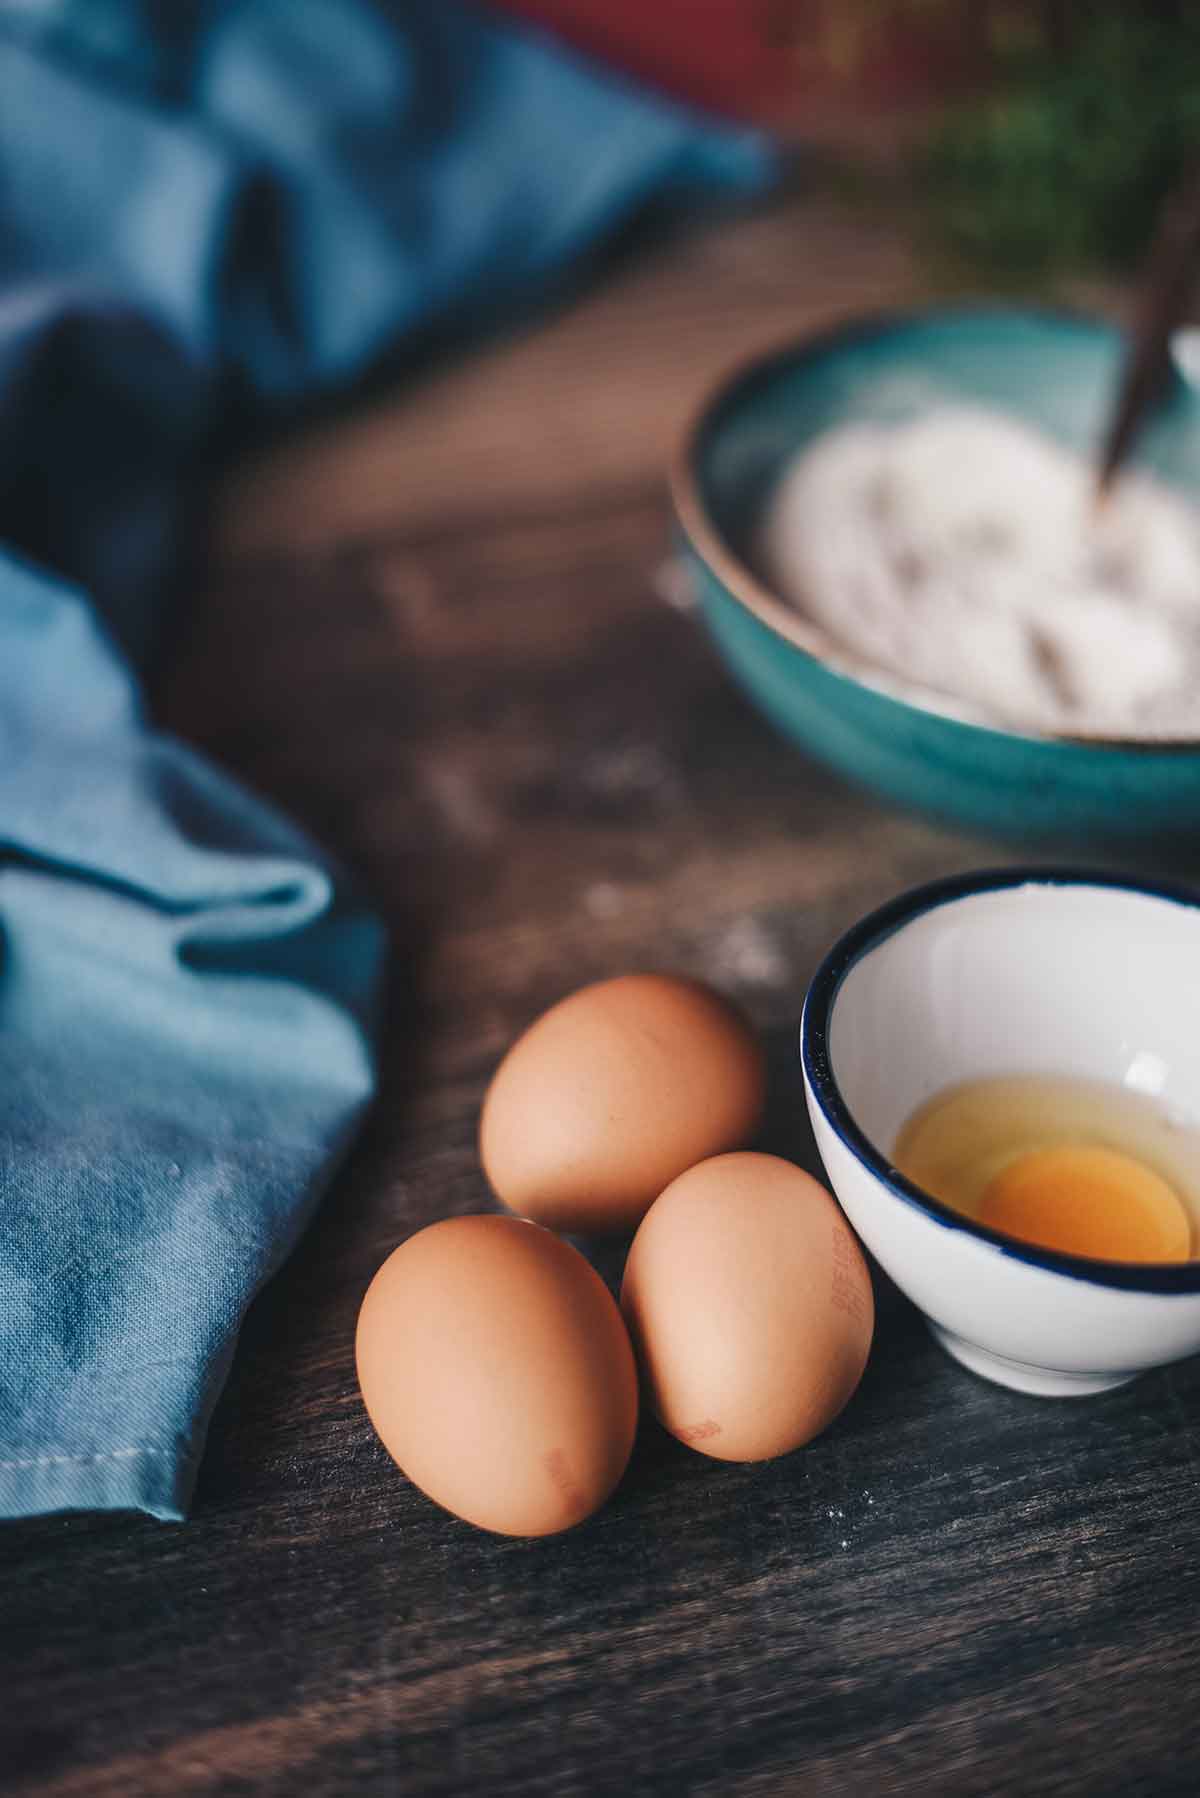 Eggs are a great source of protein, but the yolks are high in saturated fats. Therefore try to avoid having more than two egg yolks per meal. You can eat as much egg white as you like.